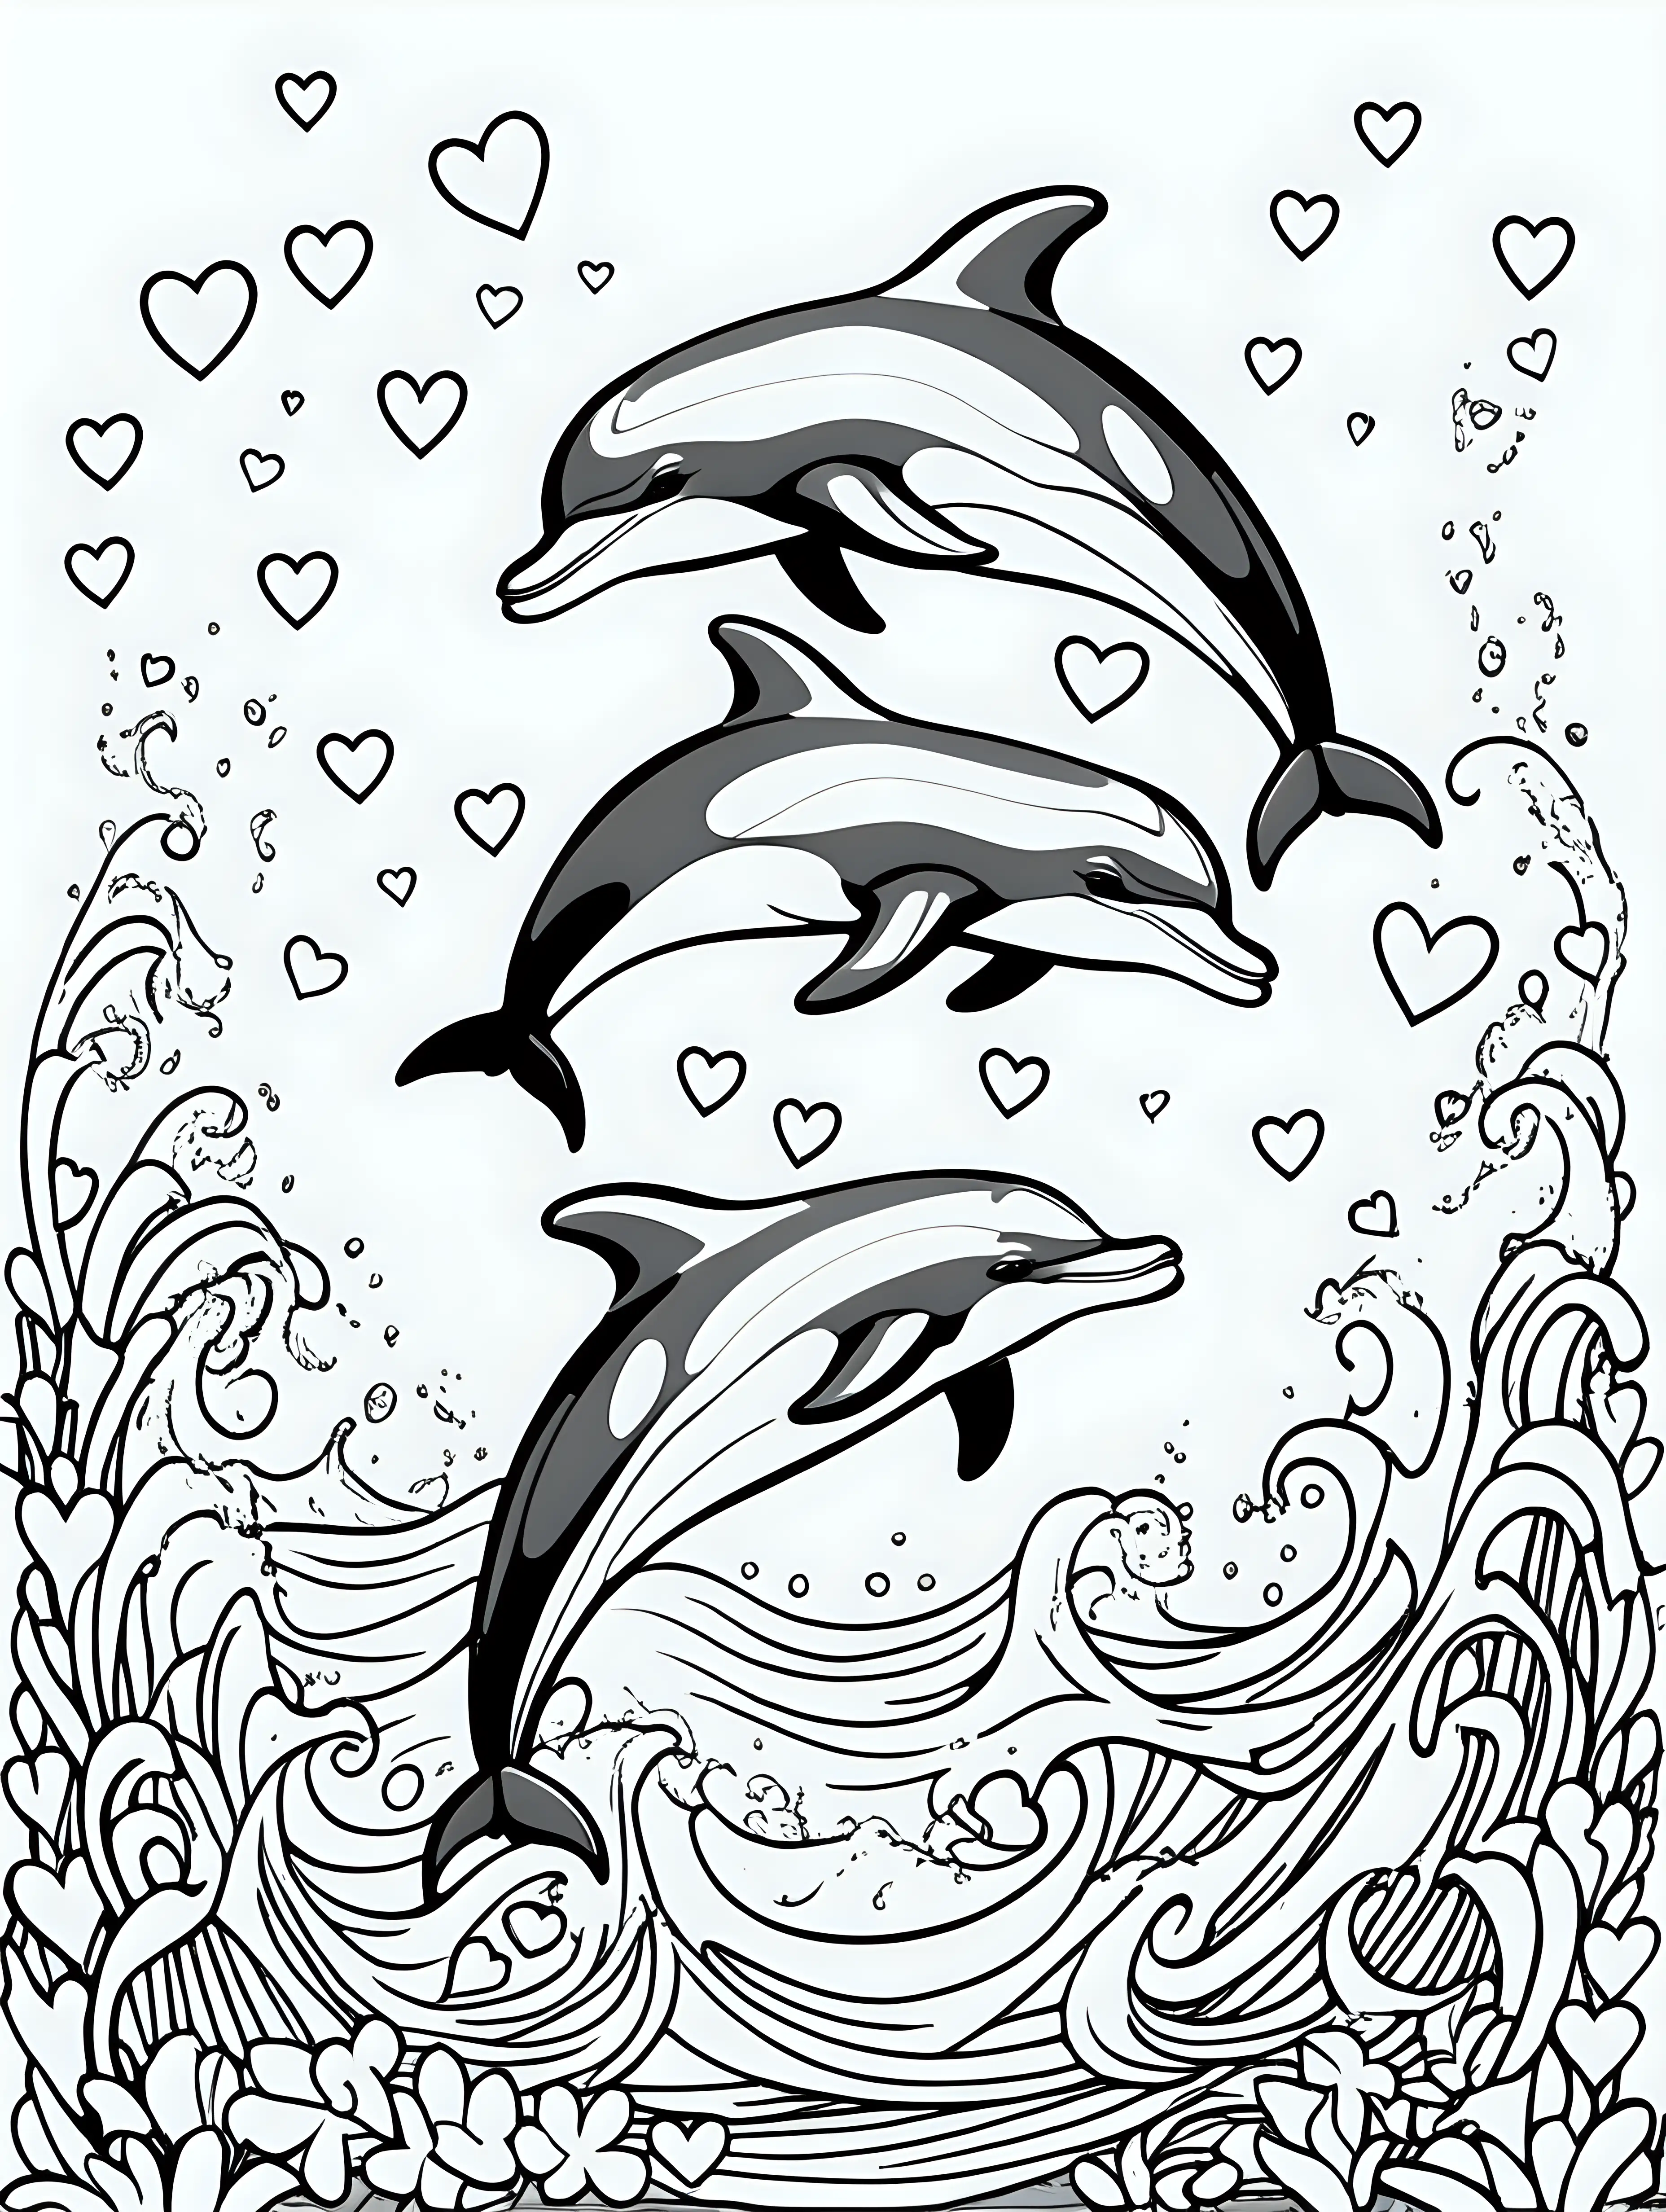 Playful Dolphins Coloring Page with Hearts